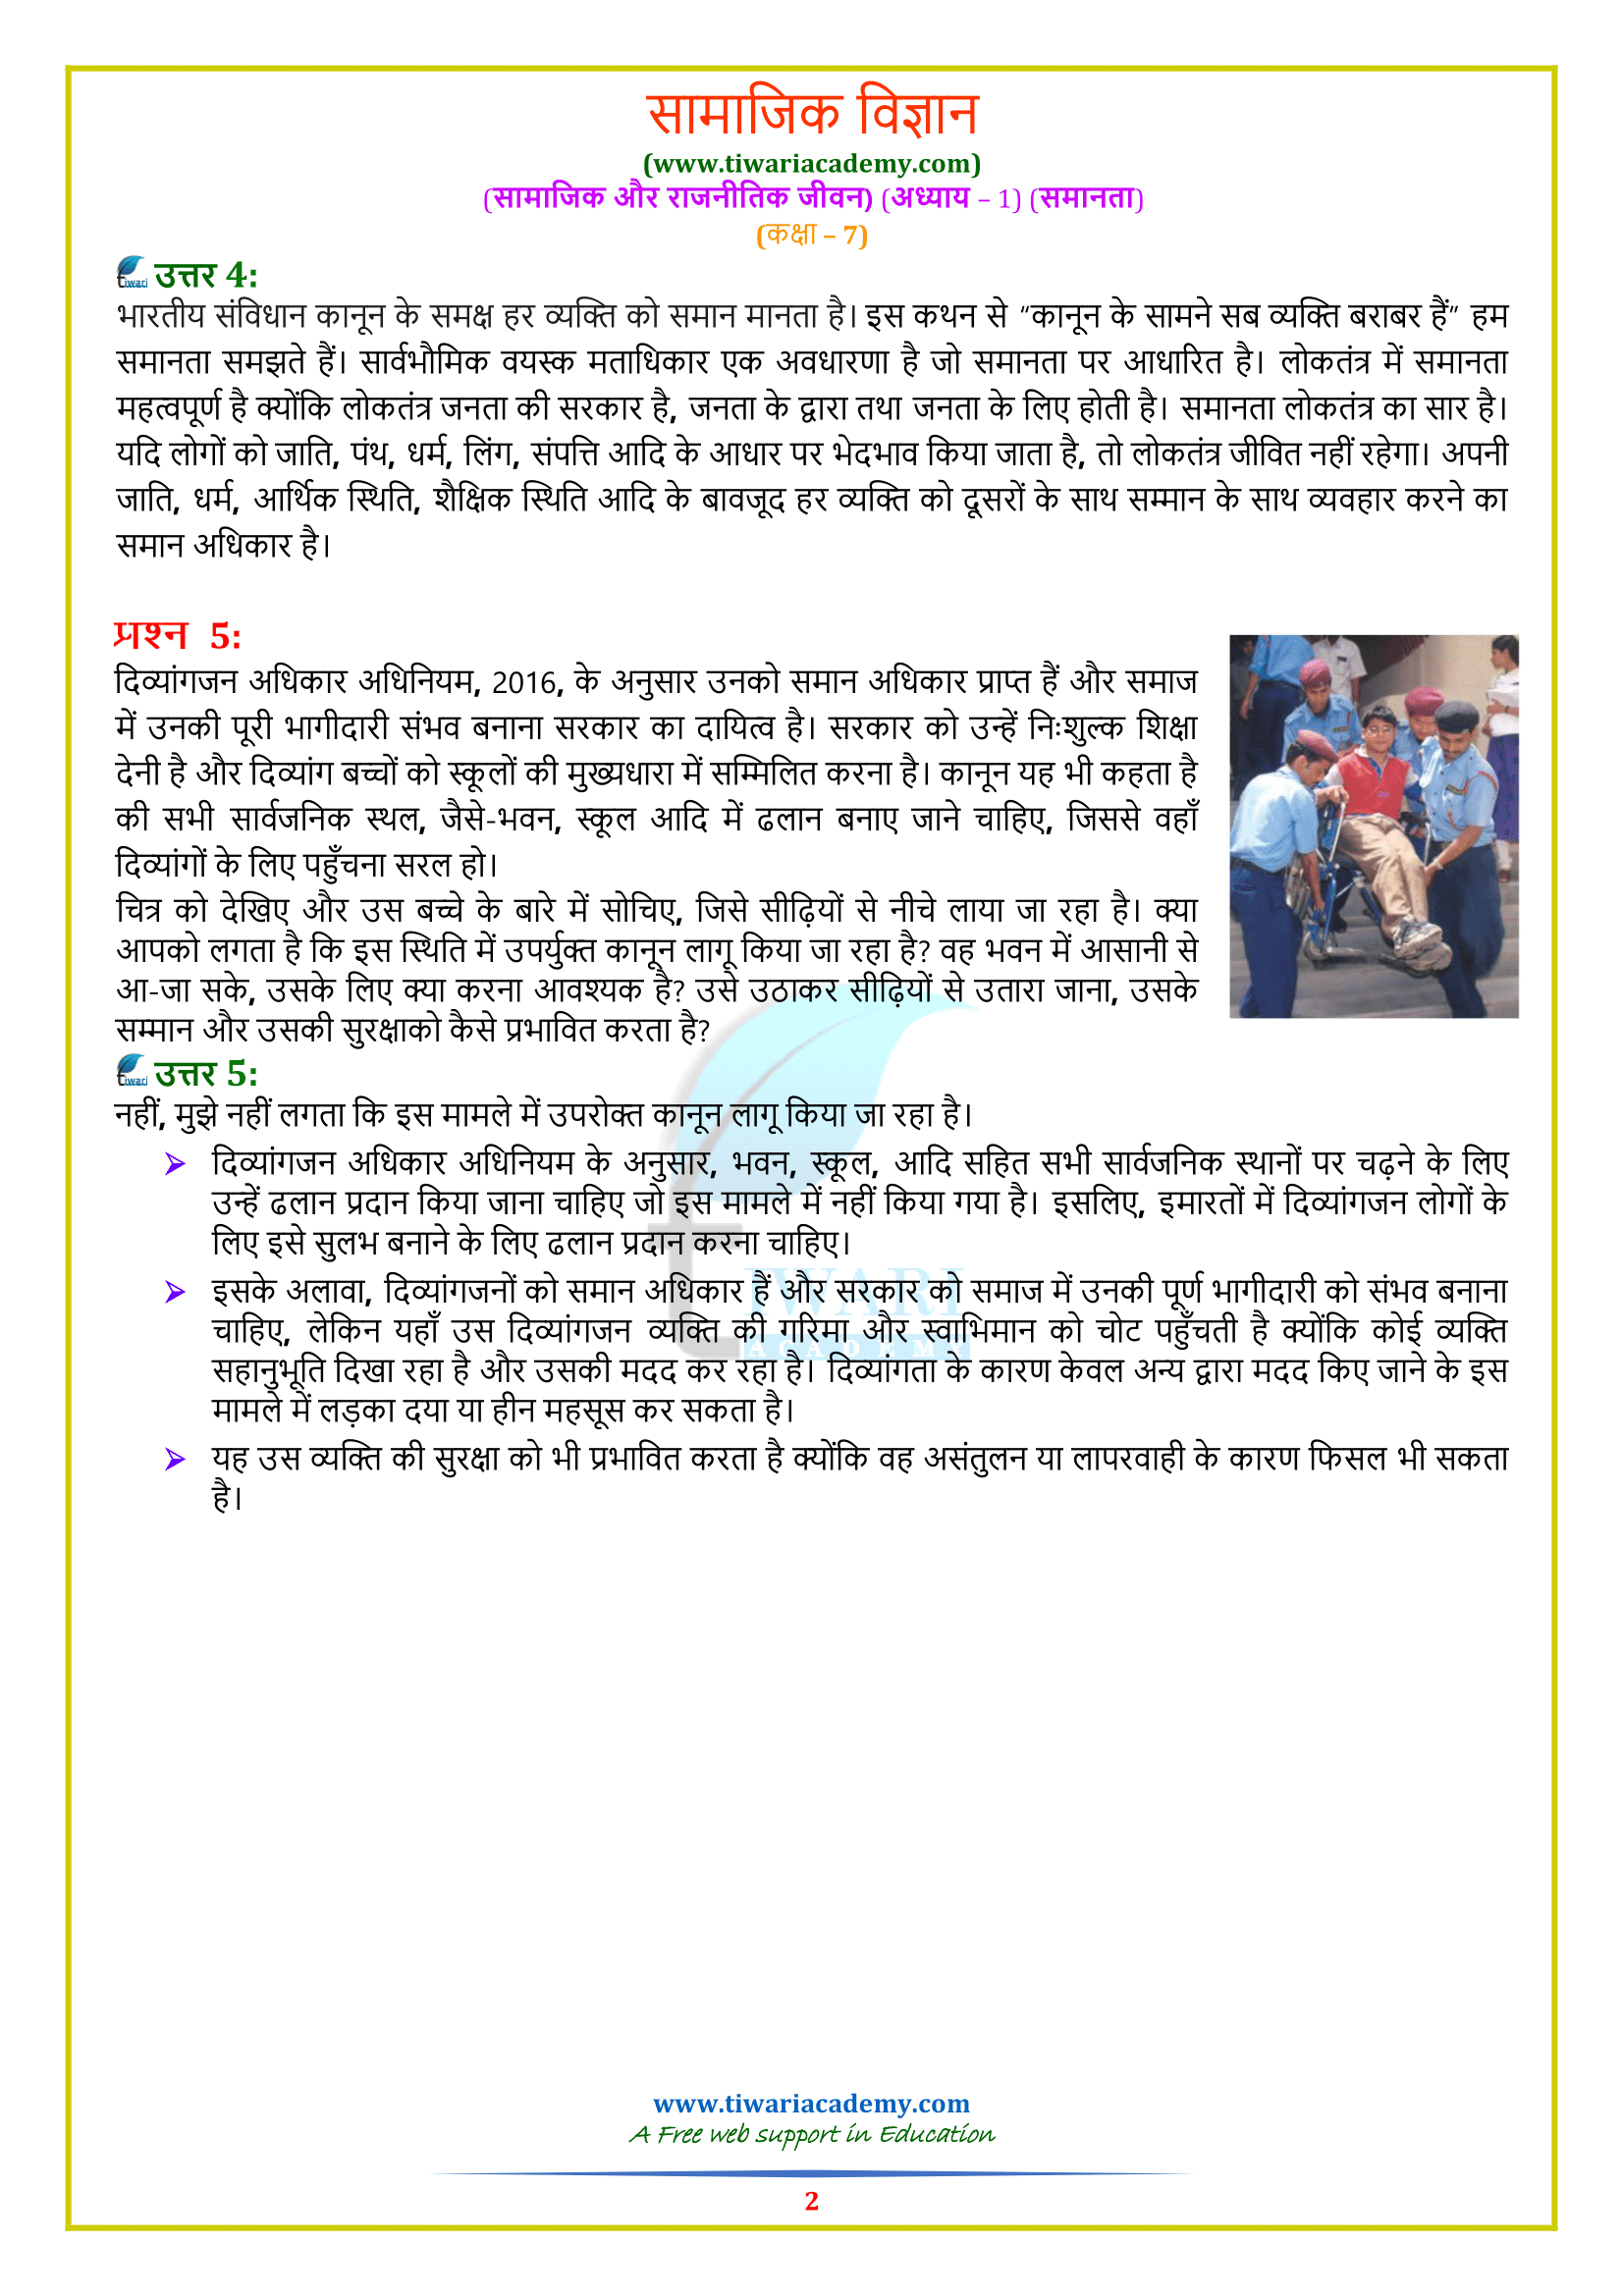 NCERT Solutions for class 7 Civics Chapter 1 in Hindi Medium